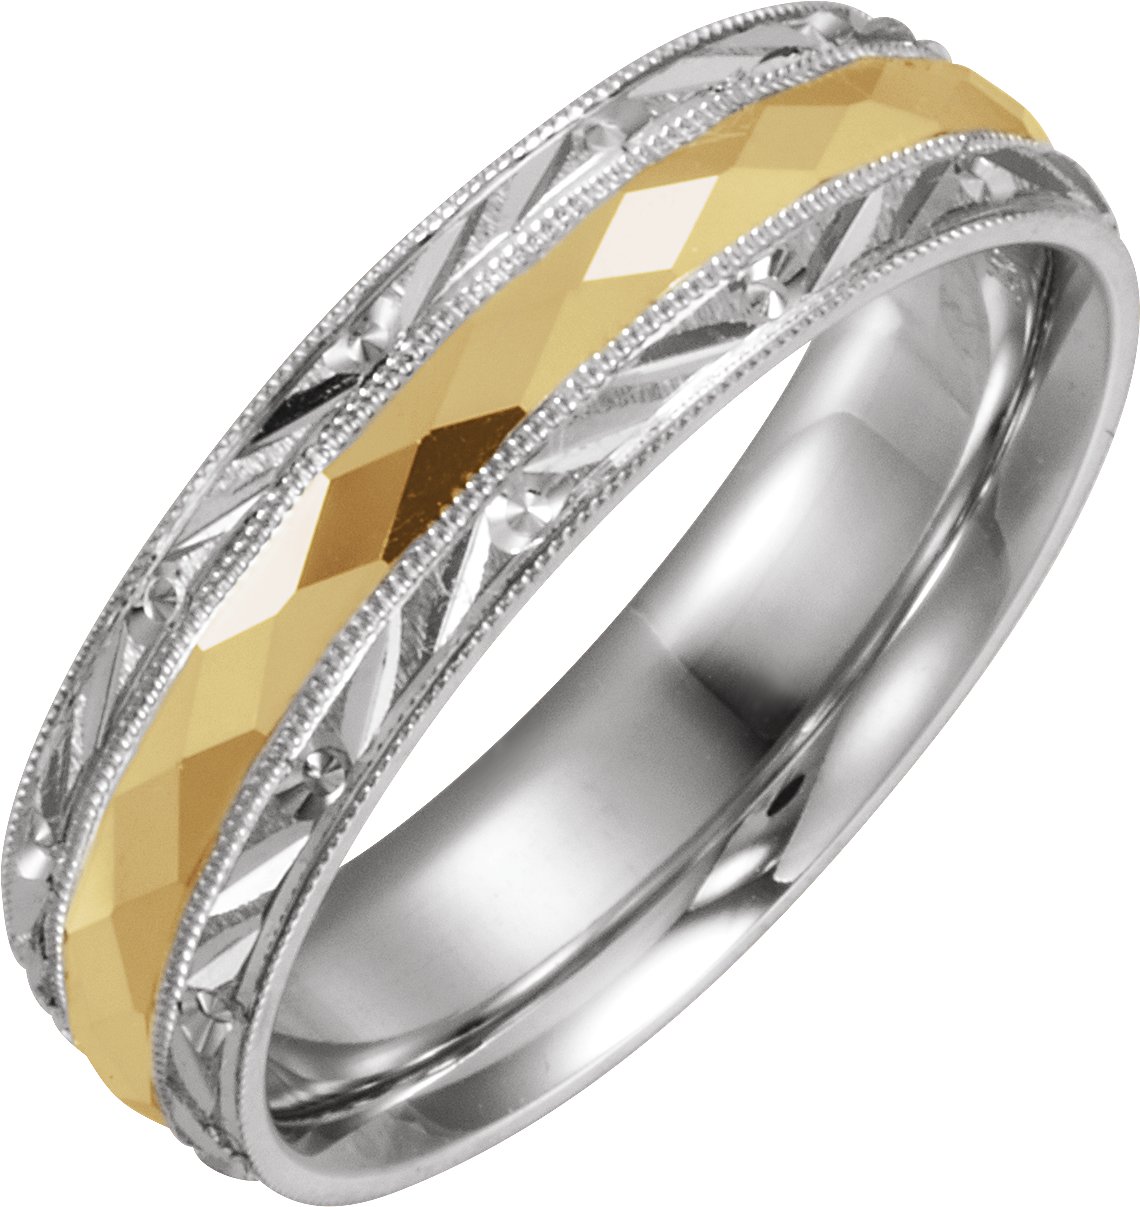 14K White/Yellow 6 mm Design-Engraved Band with Milgrain Size 12